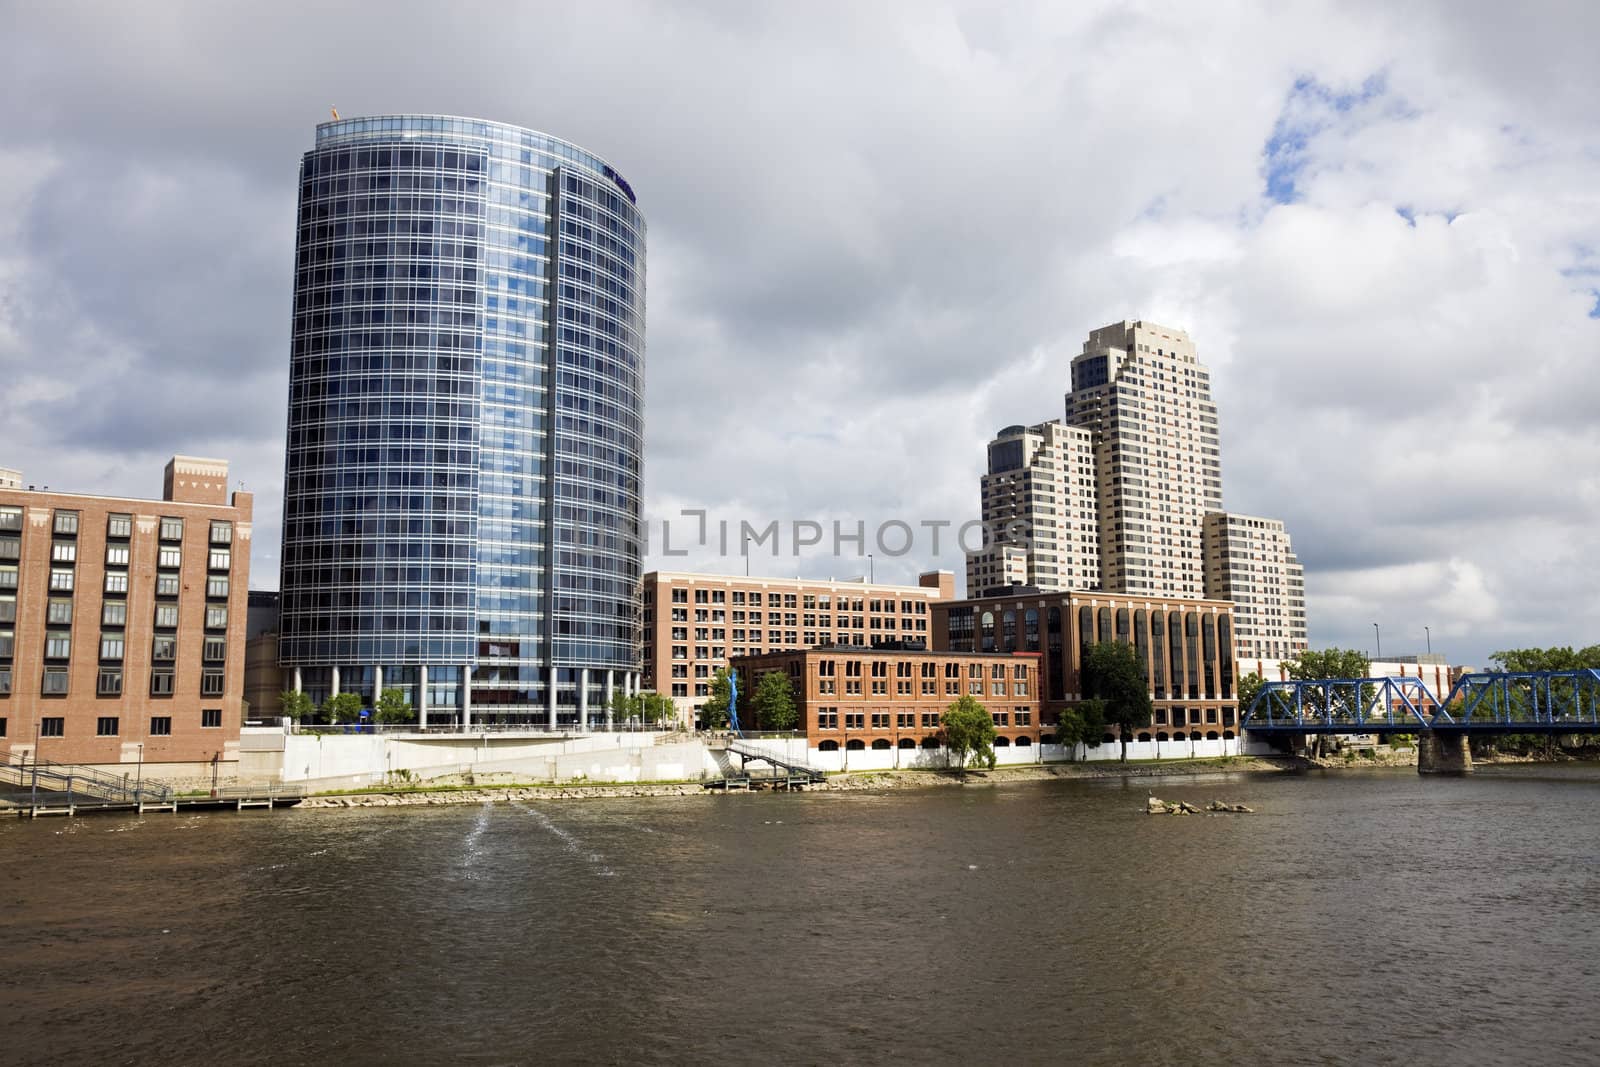 Architecture of Grand Rapids by benkrut